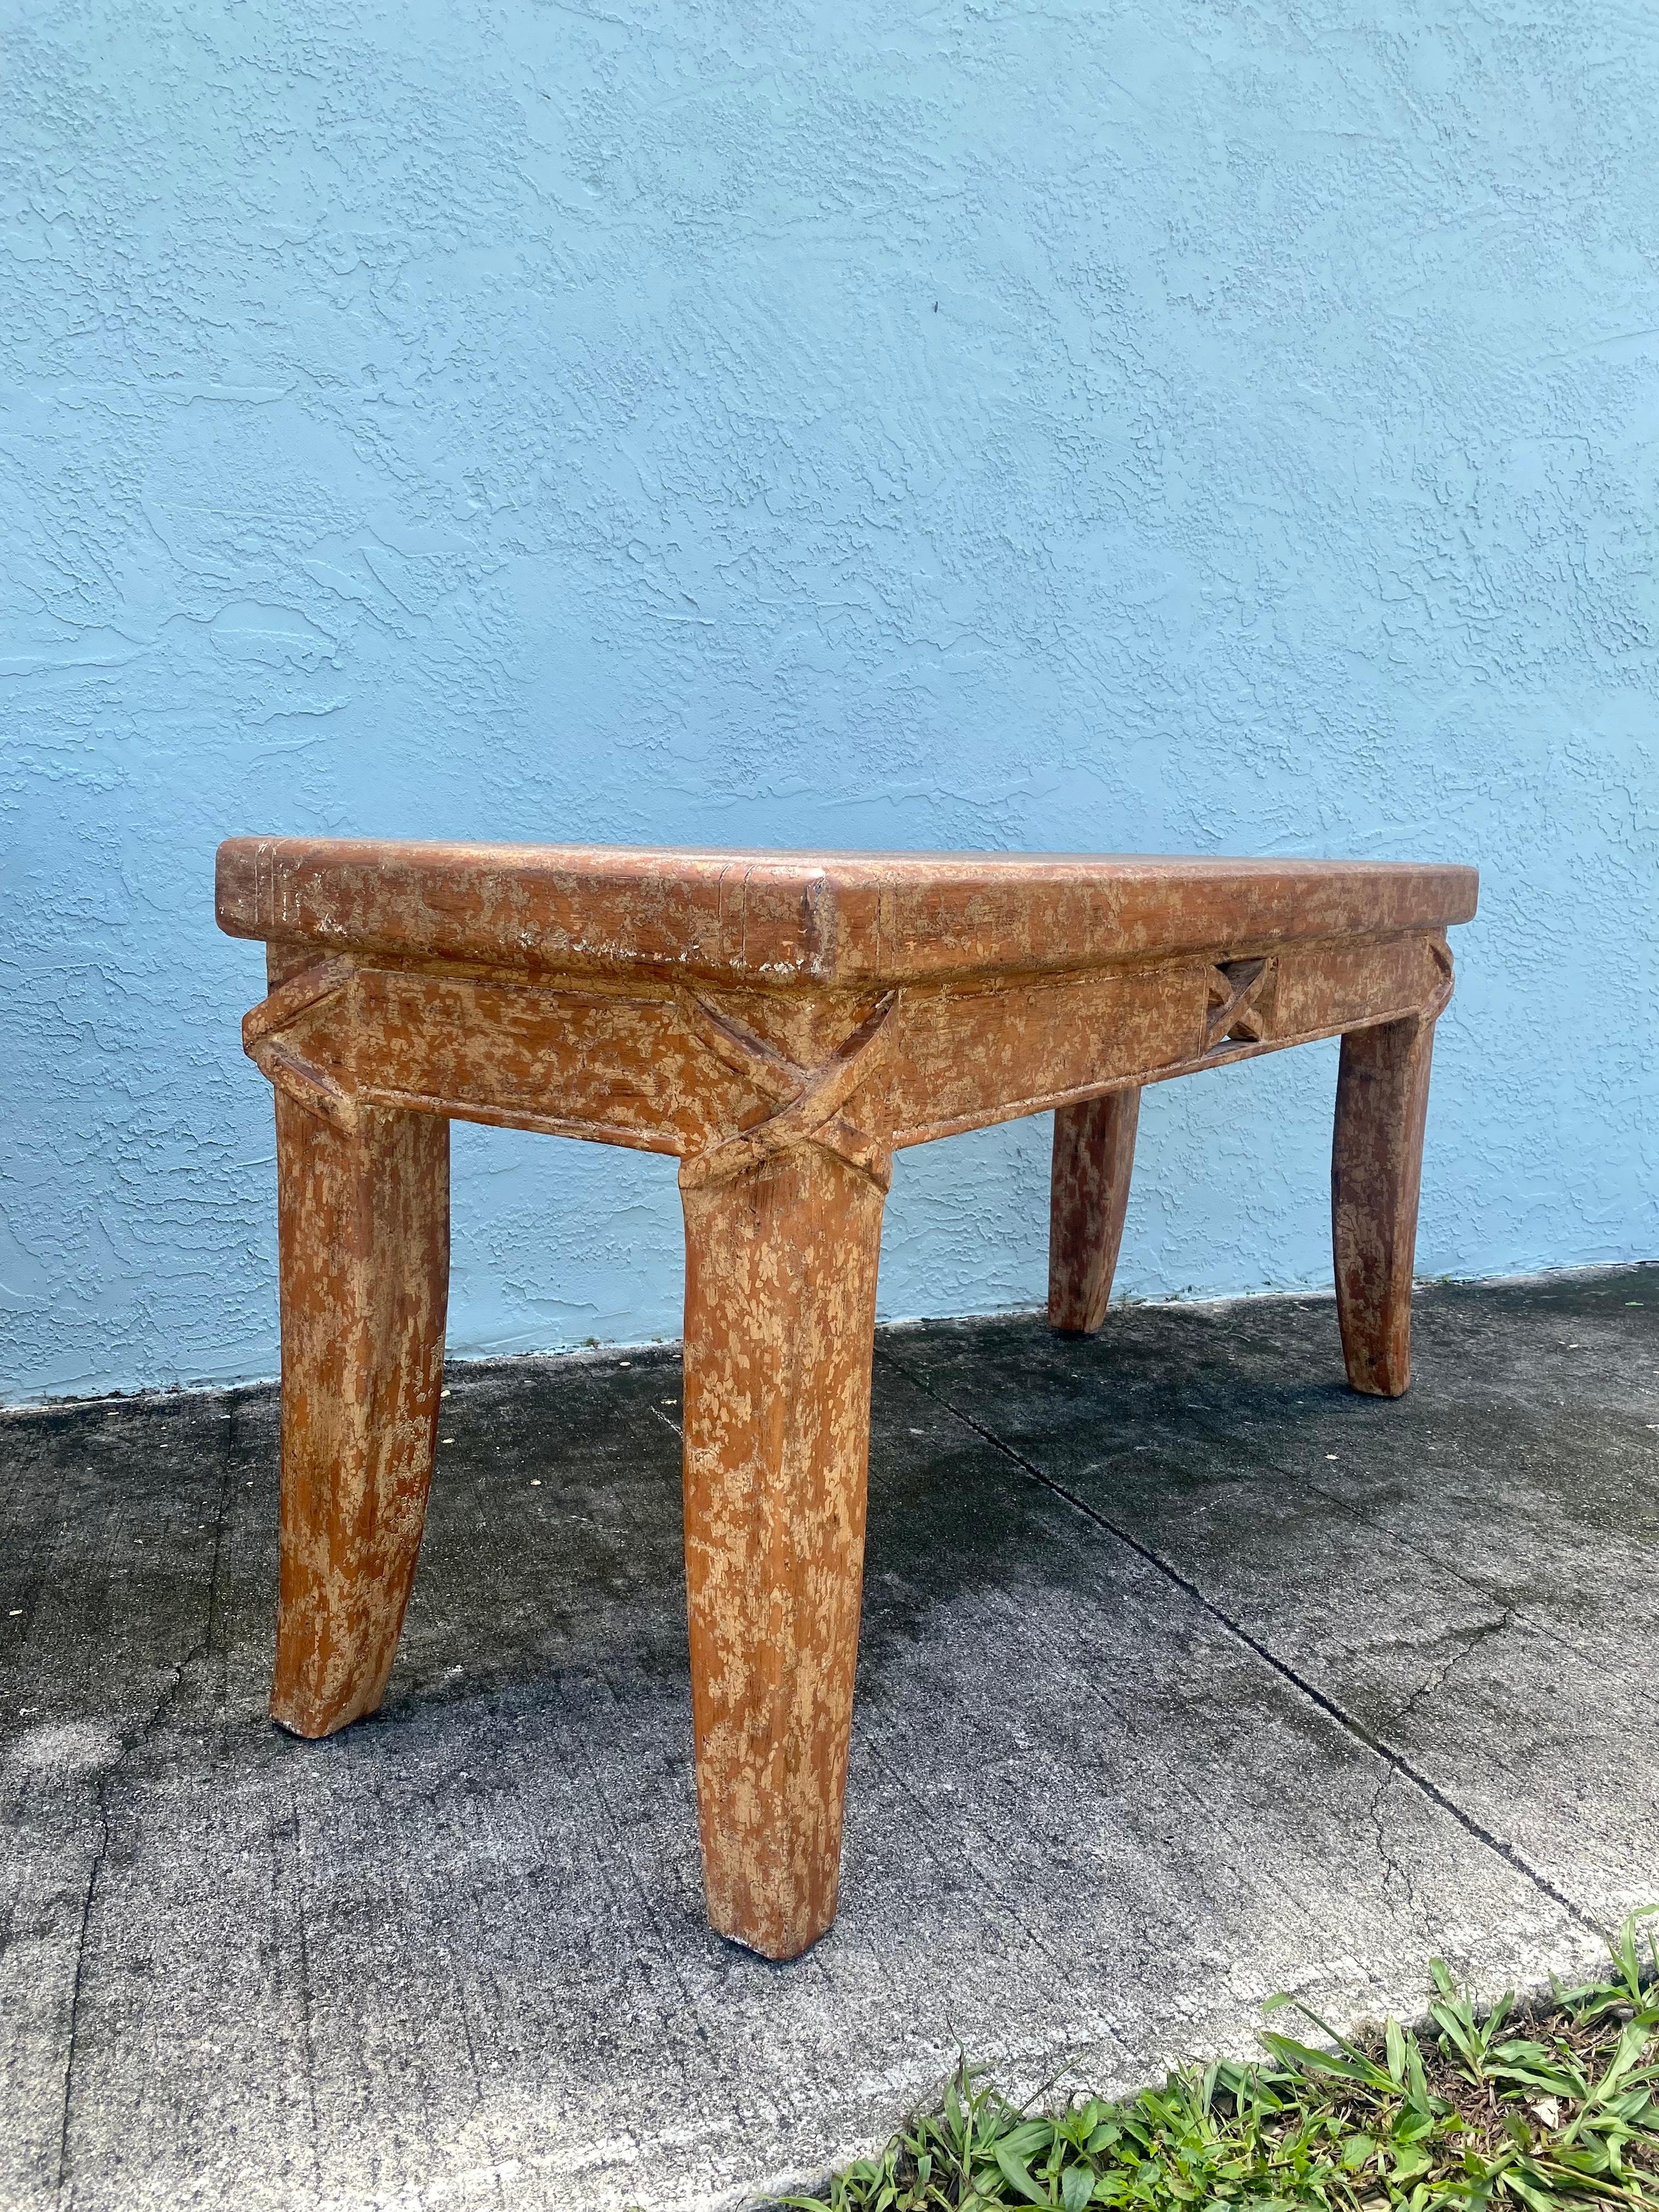 1940s Artistic Salmon Carved Textured Rustic Farmhouse Wood Console Table Desk In Good Condition For Sale In Fort Lauderdale, FL